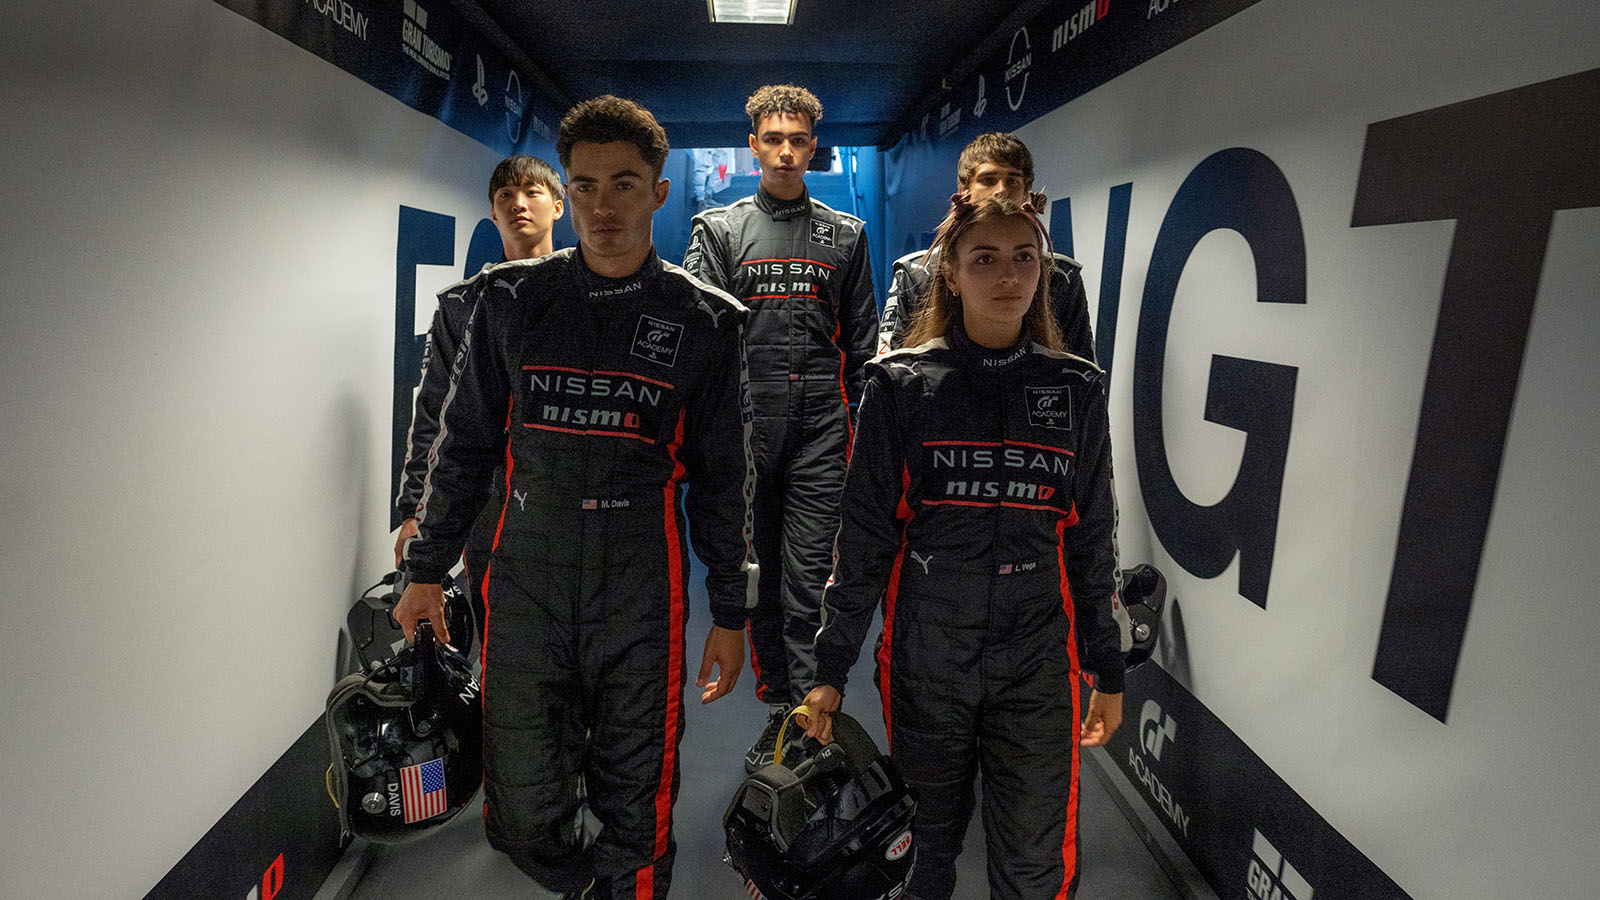 Heading out to the paddock. Gamers become drivers in Gran Turismo. Image © Sony Pictures